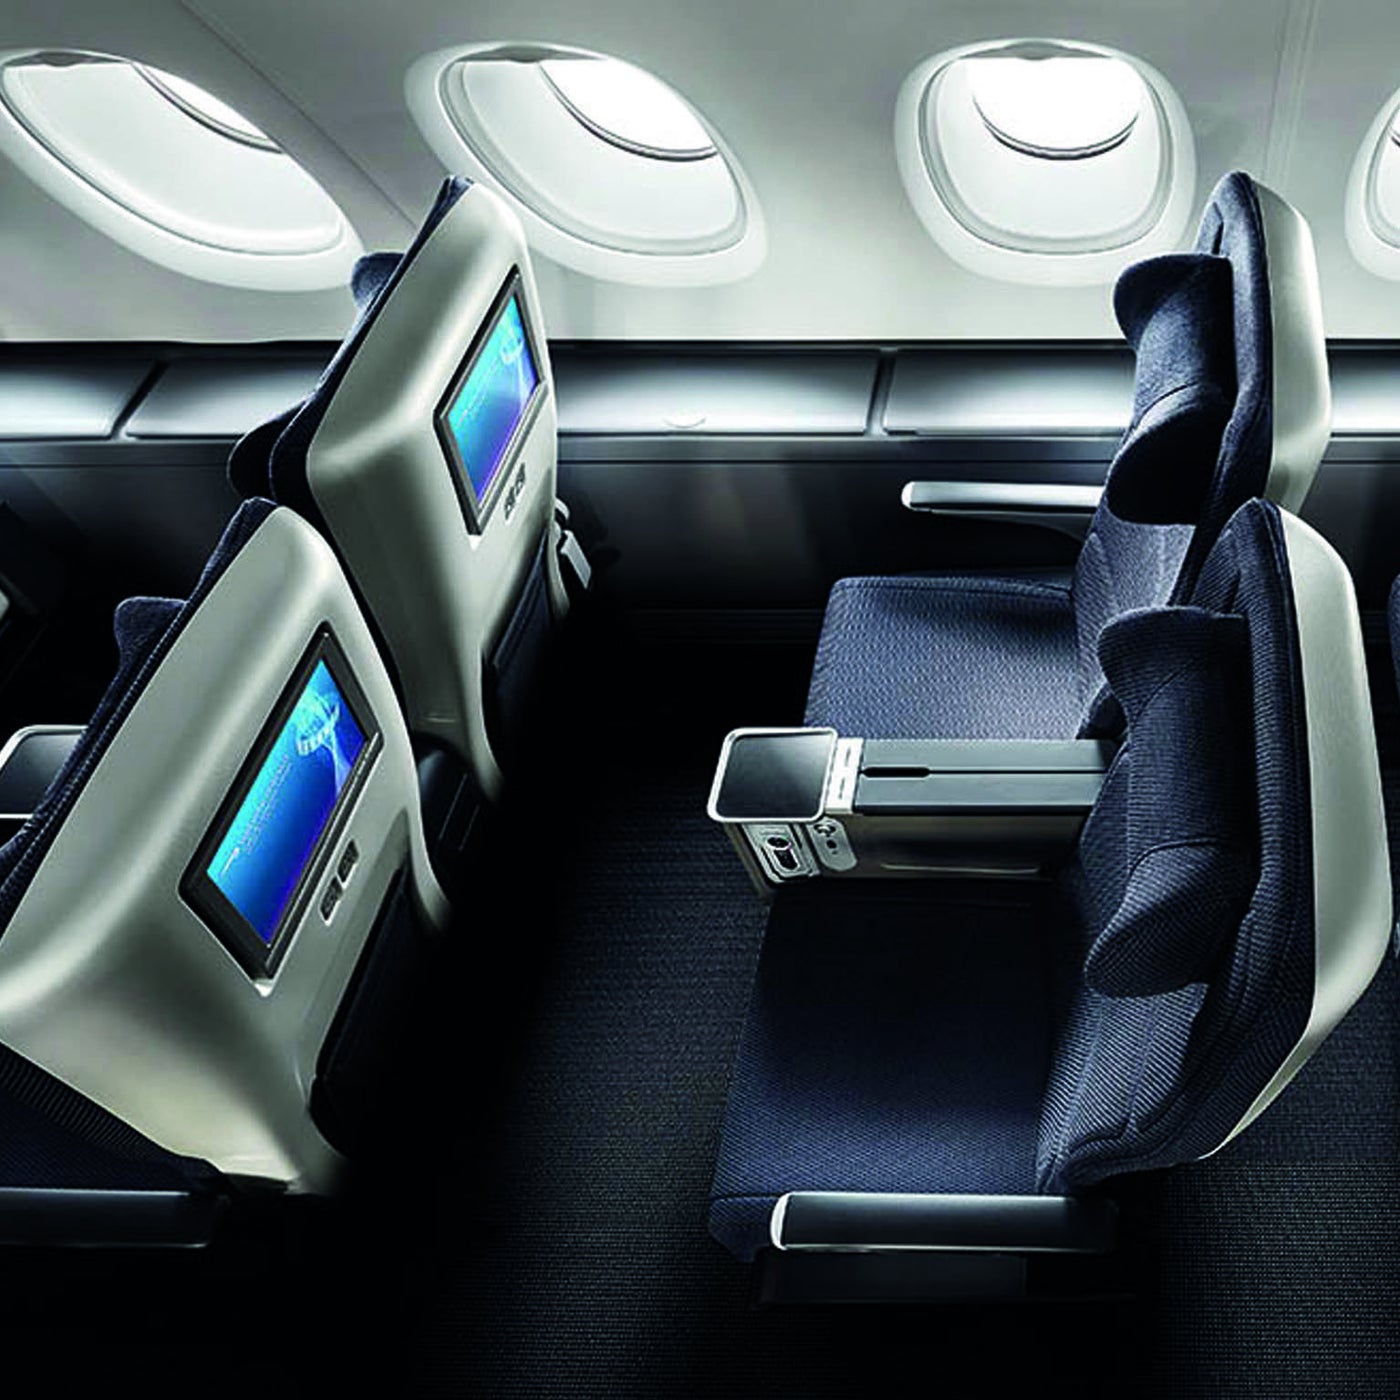 The best seats on a British Airways Airbus A380